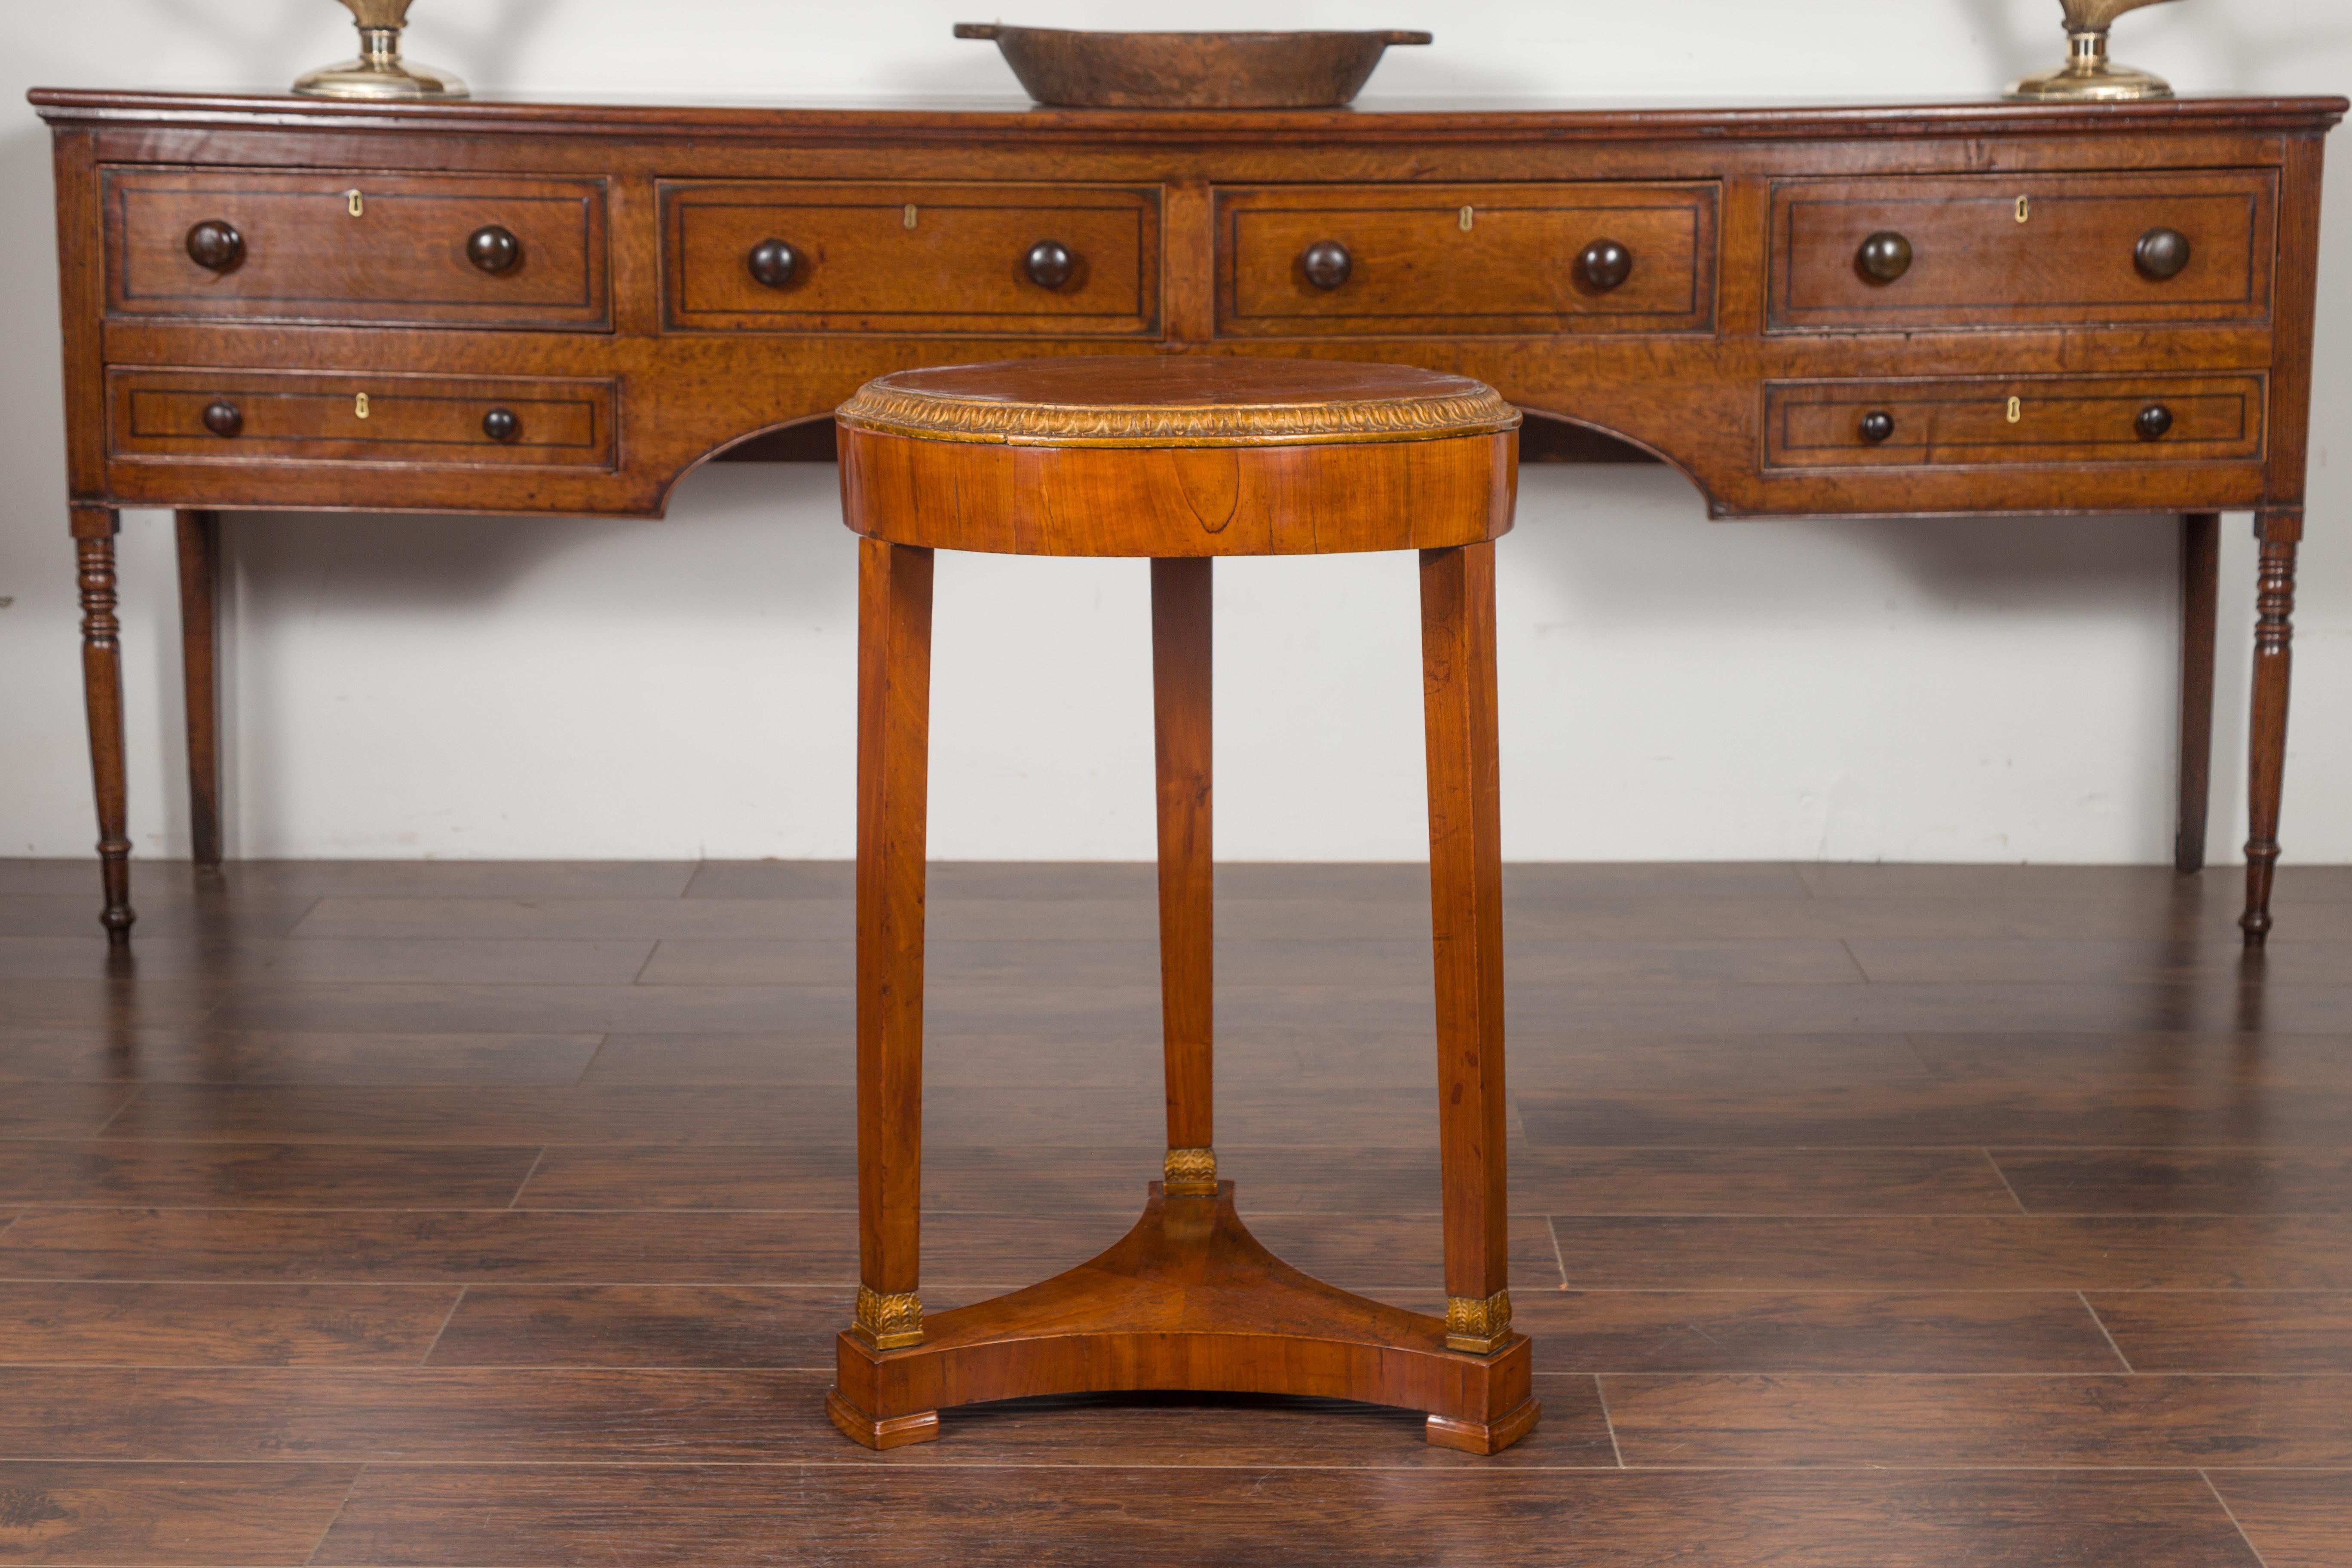 An Austrian Biedermeier period walnut tripod table from the mid-19th century, with gilt accents and tripartite shelf. Created in Austria during the second quarter of the 19th century, this Biedermeier table features a planked circular top surrounded